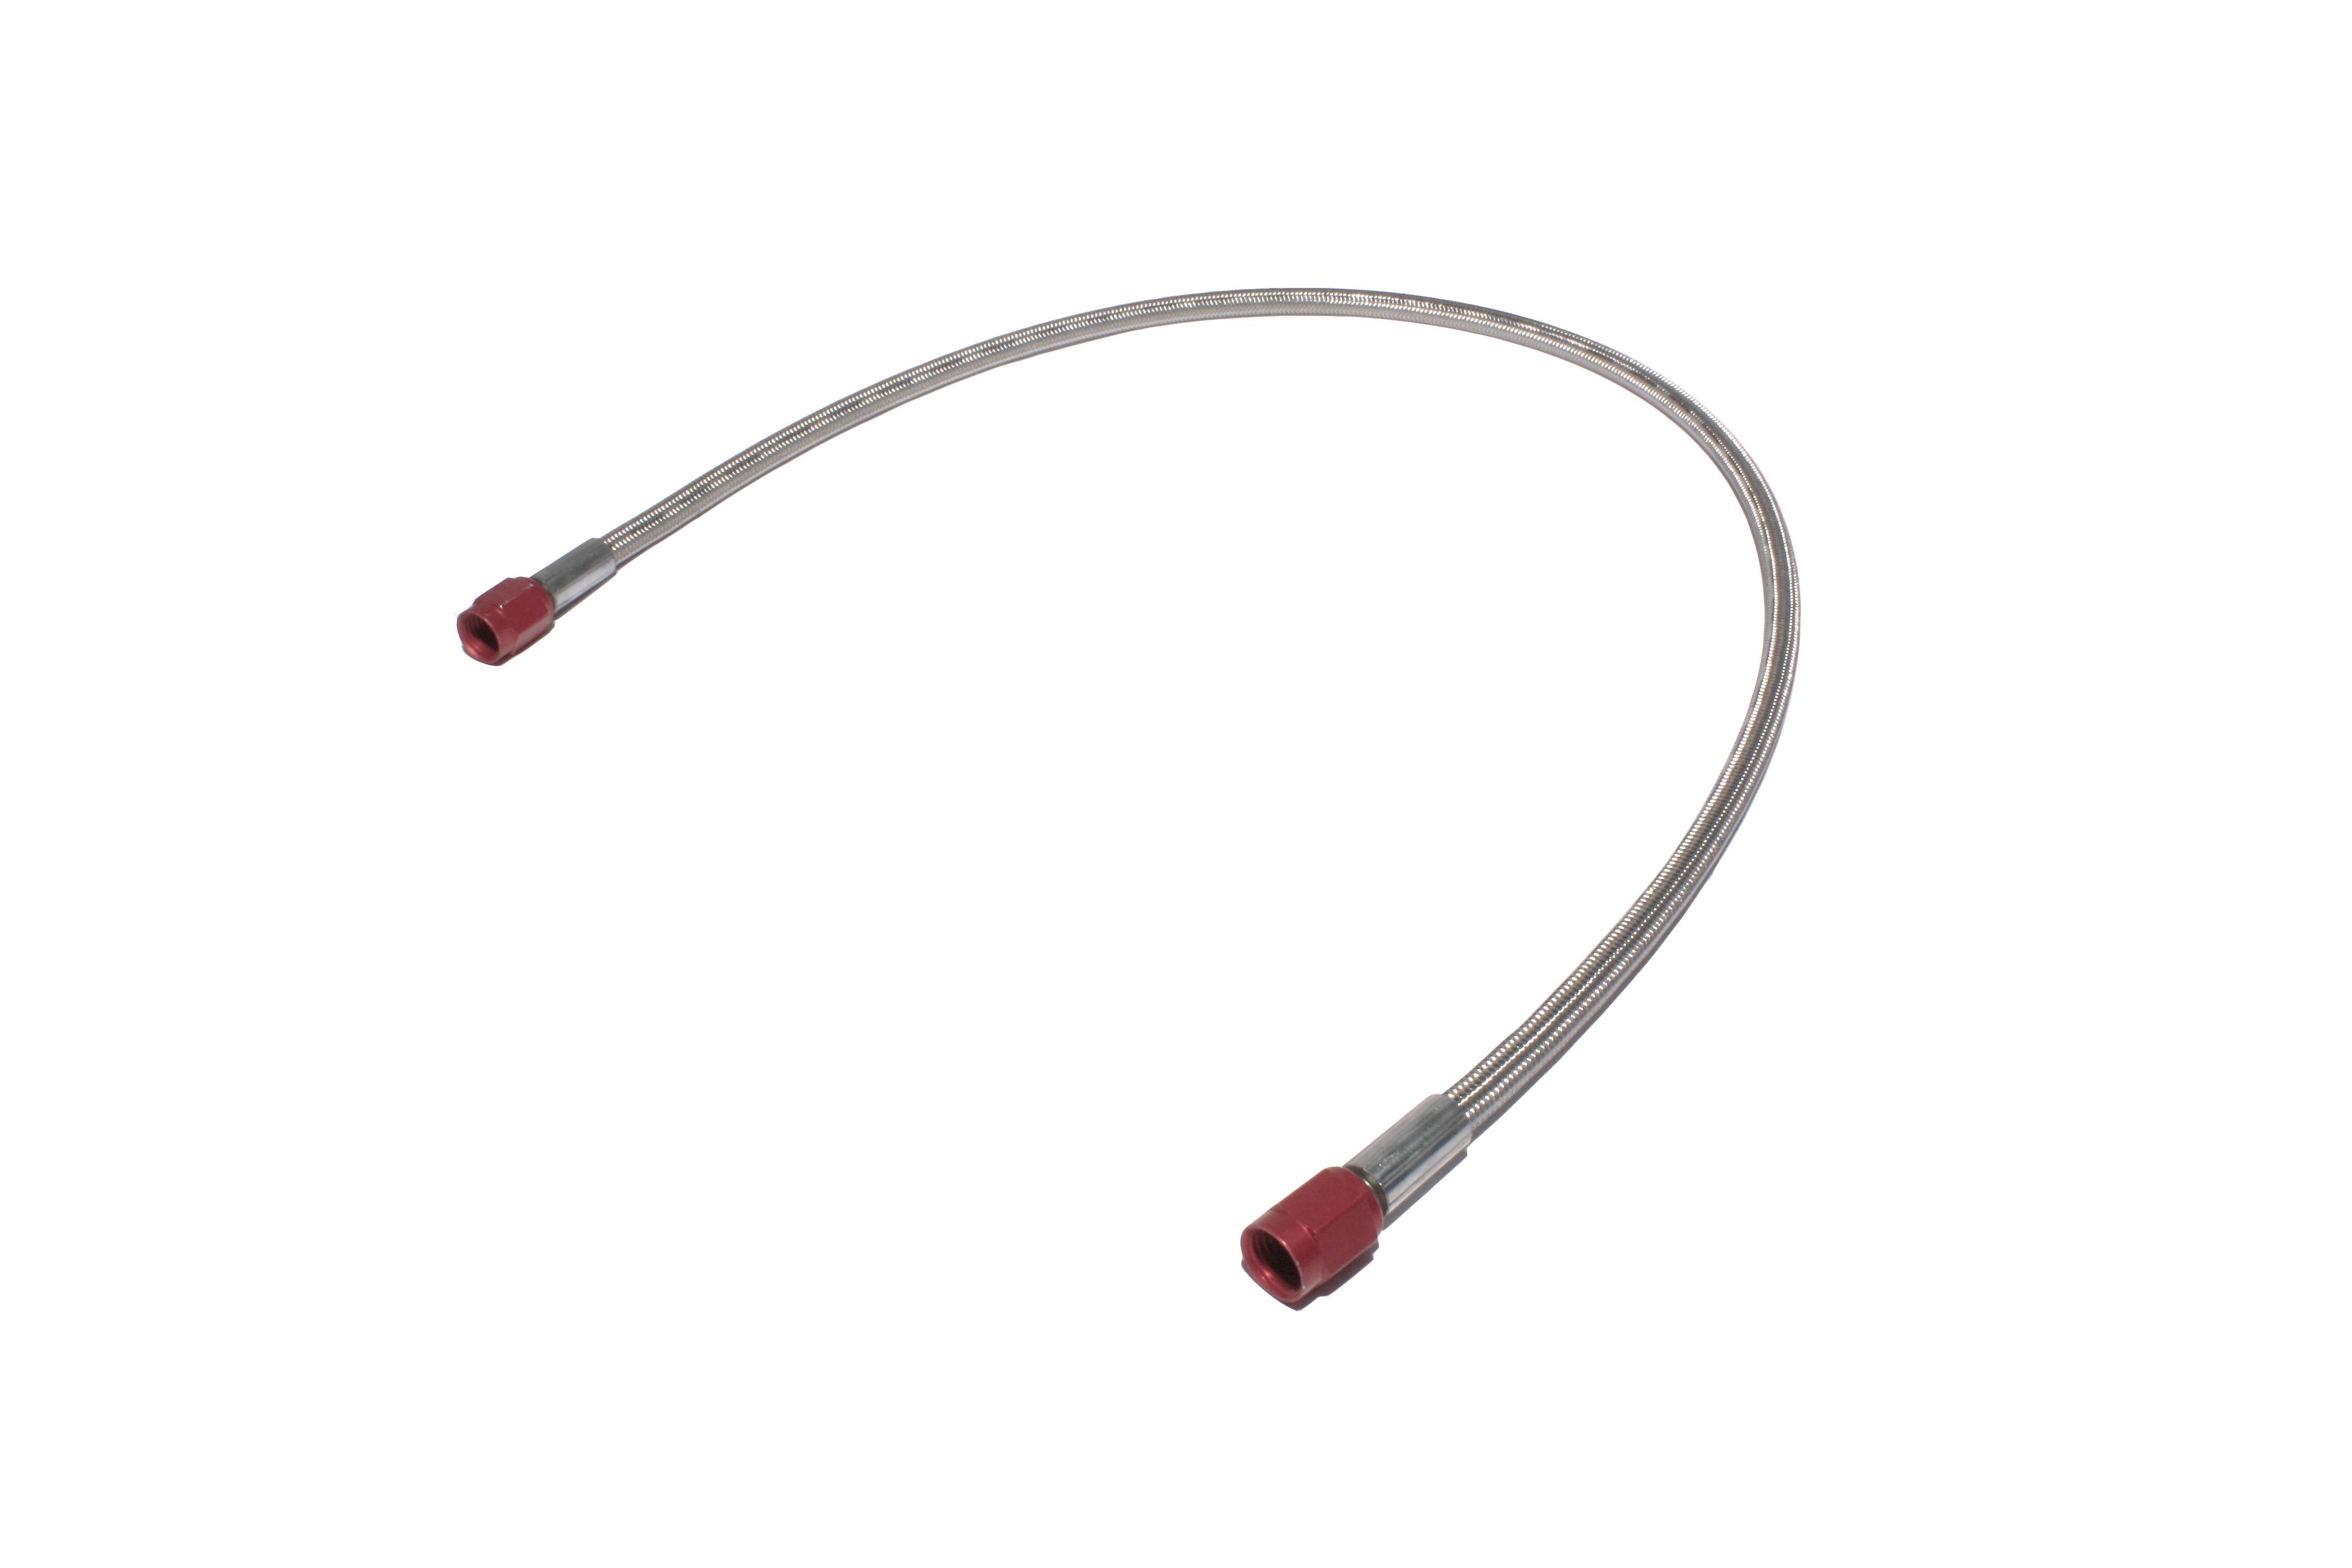 ZEX 2' (ft) Long -3AN Braided Hose with Red Ends, 3AN 2', Corvette, Camaro and others